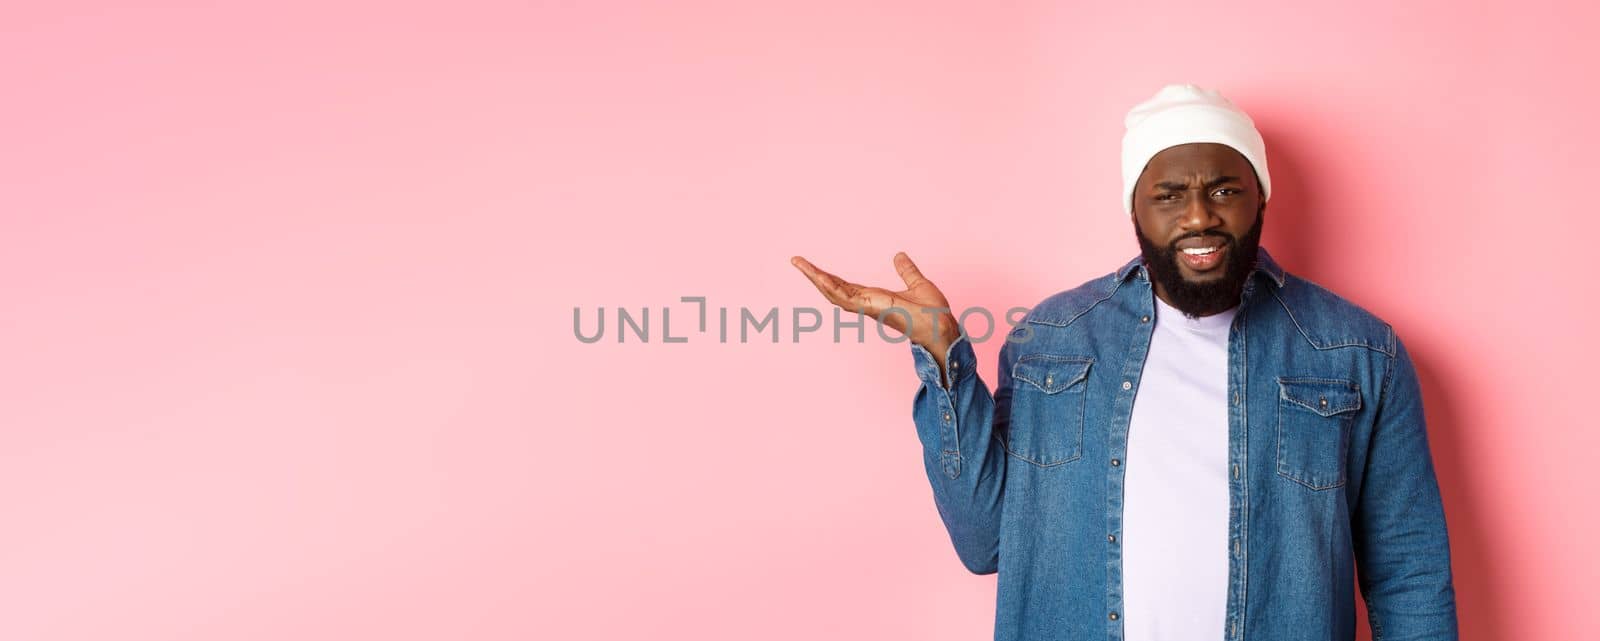 Annoyed and confused Black man arguing, raising hand up and staring at camera puzzled, cant understand wtf, standing over pink background.